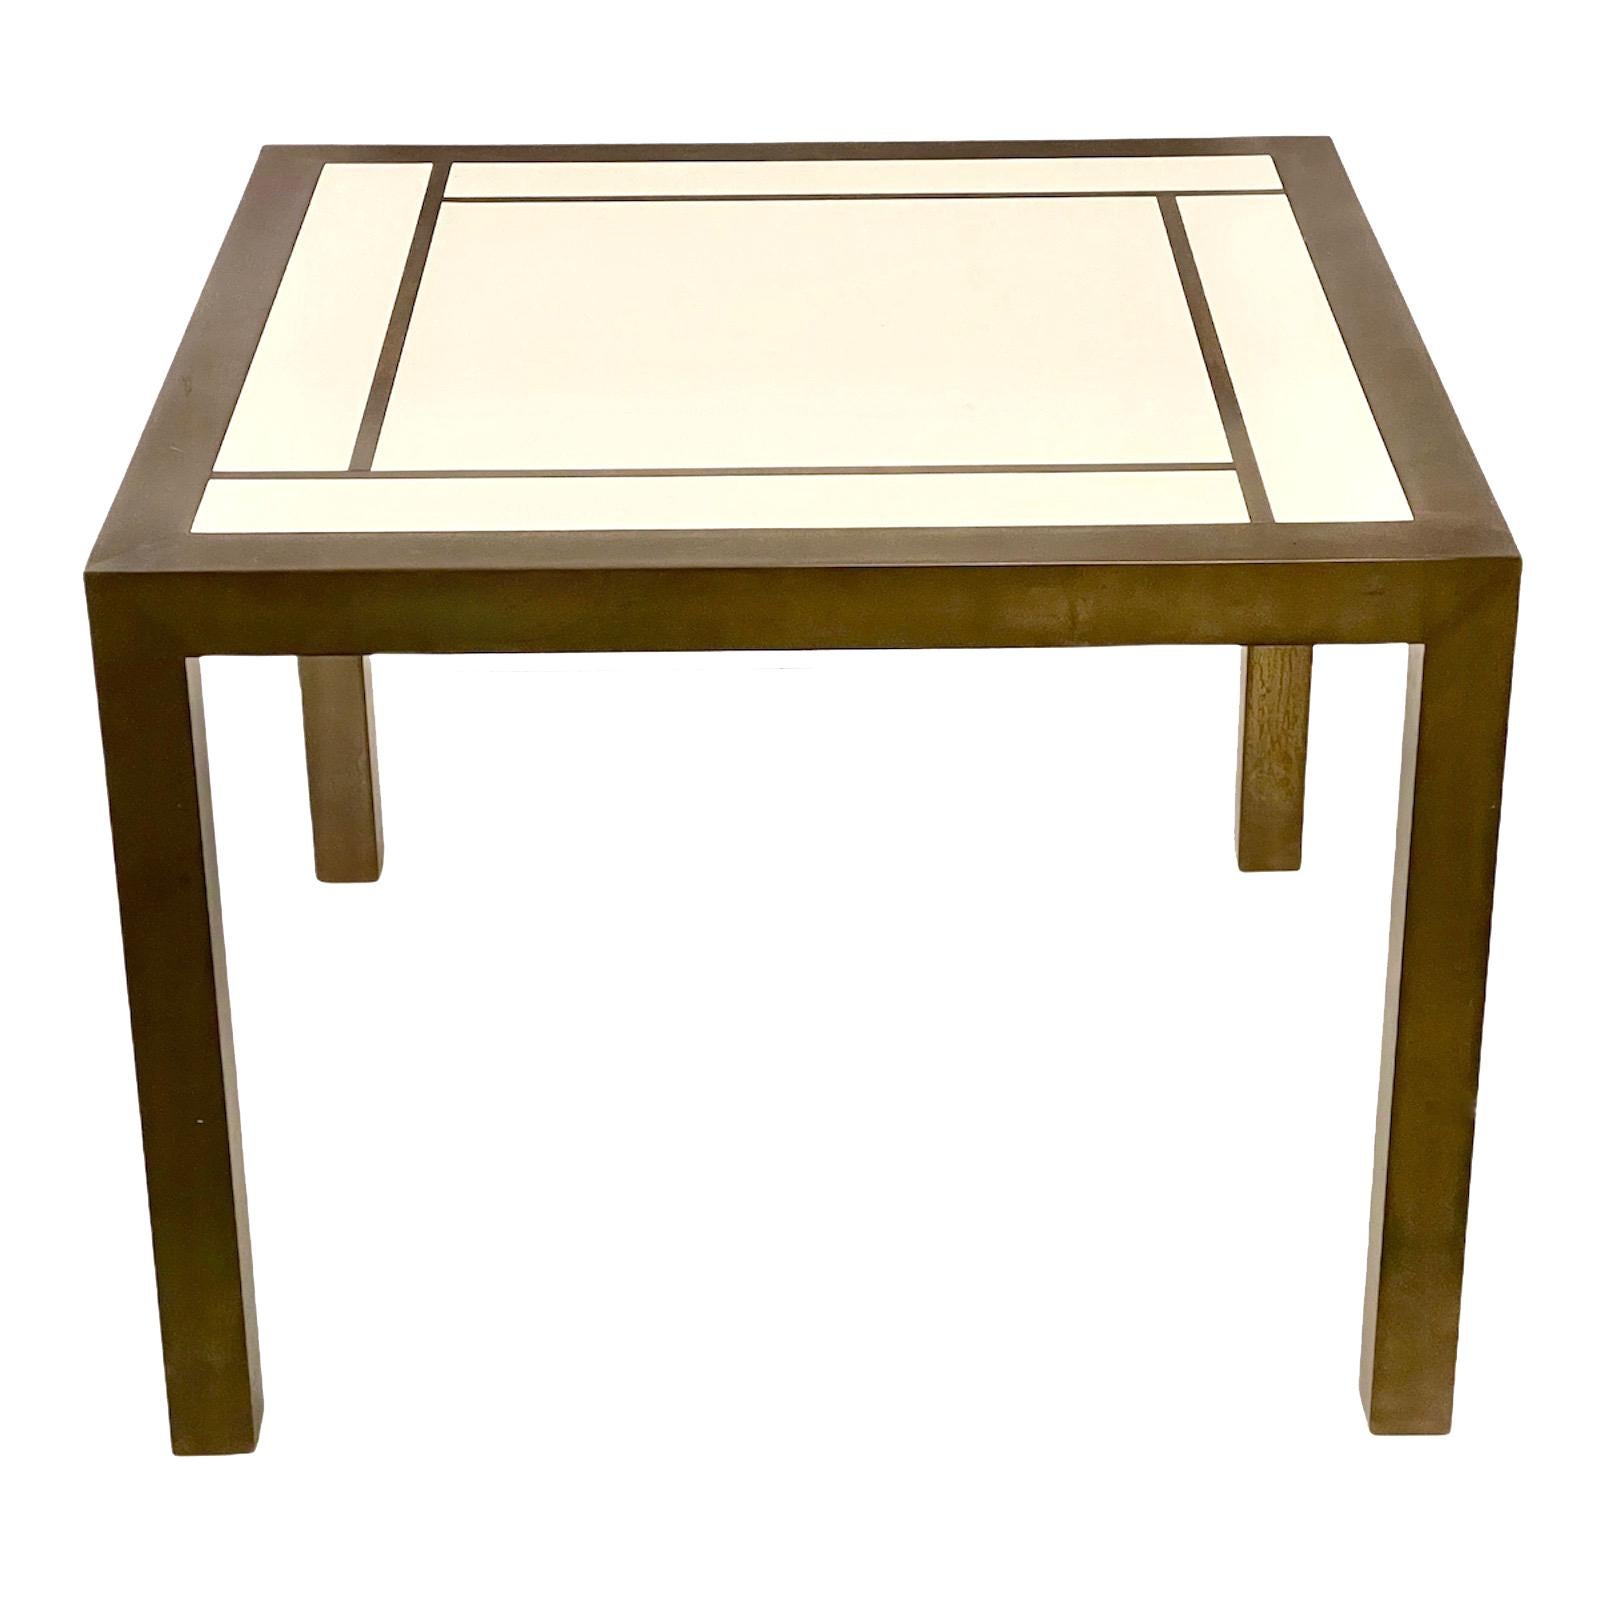 Fantastic midcentury brass and Formica laminate side table. This wonderful piece is inspired by Willy Rizzo and was designed in Italy in the 1970s.

This amazing item has brass finishes with a beautiful patina in contrast with the light color of